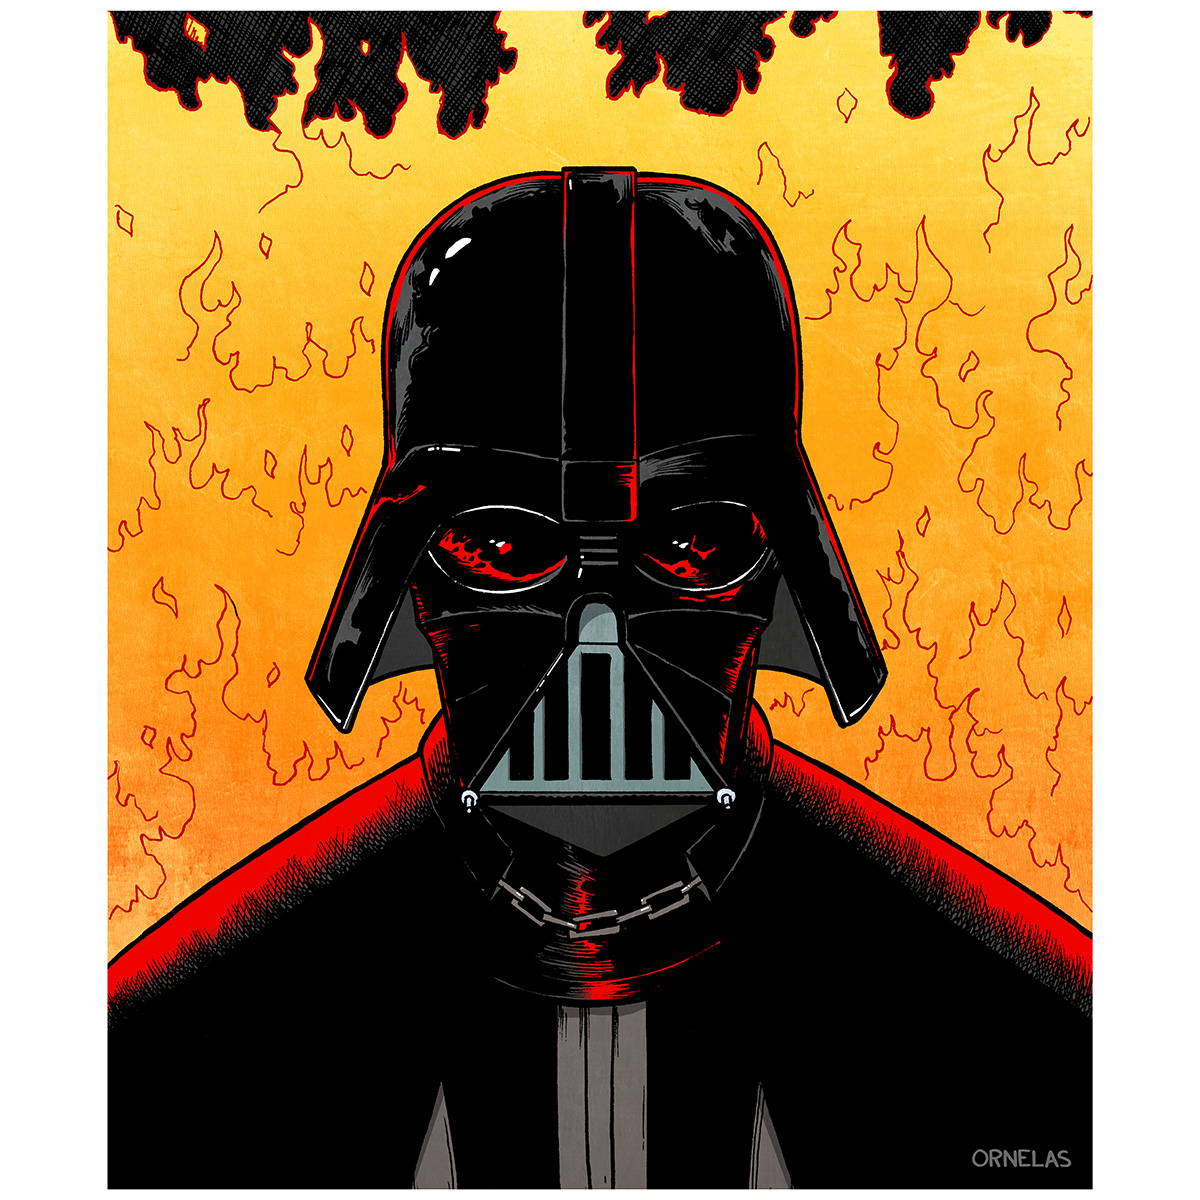 May The Fourth Be With You #BuyOrnelasArt #commissionsopen #comicbooks #comix #supportlocalartists #shopsmall #supportindieartists #starwarsart #maythe4thbewithyou #maythefourth #darthvader #SithLord